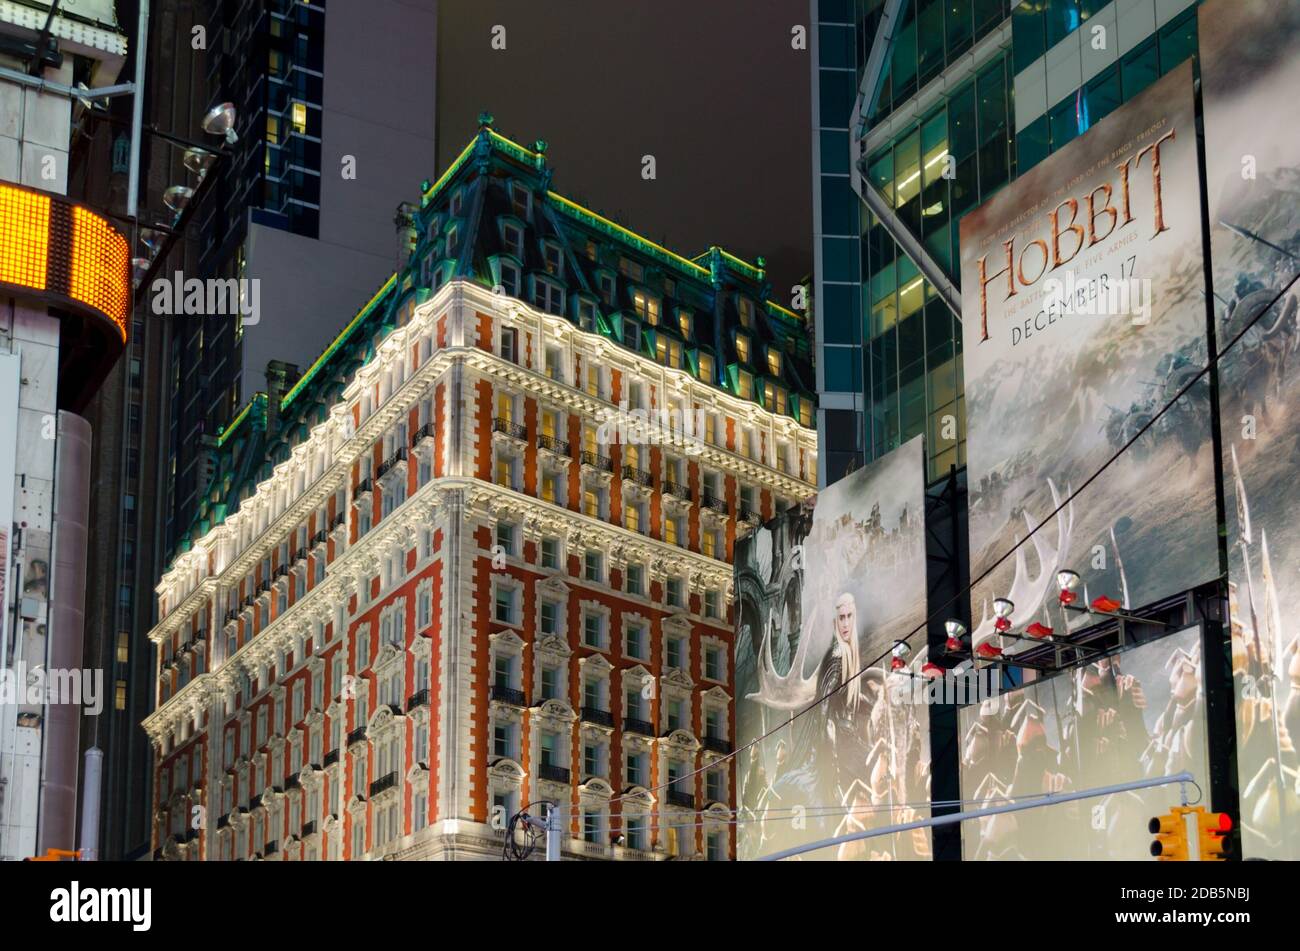 Christmas in New York's Times Square with Hobbit Advertisement and Impressive Illuminated Buildings. Stock Photo